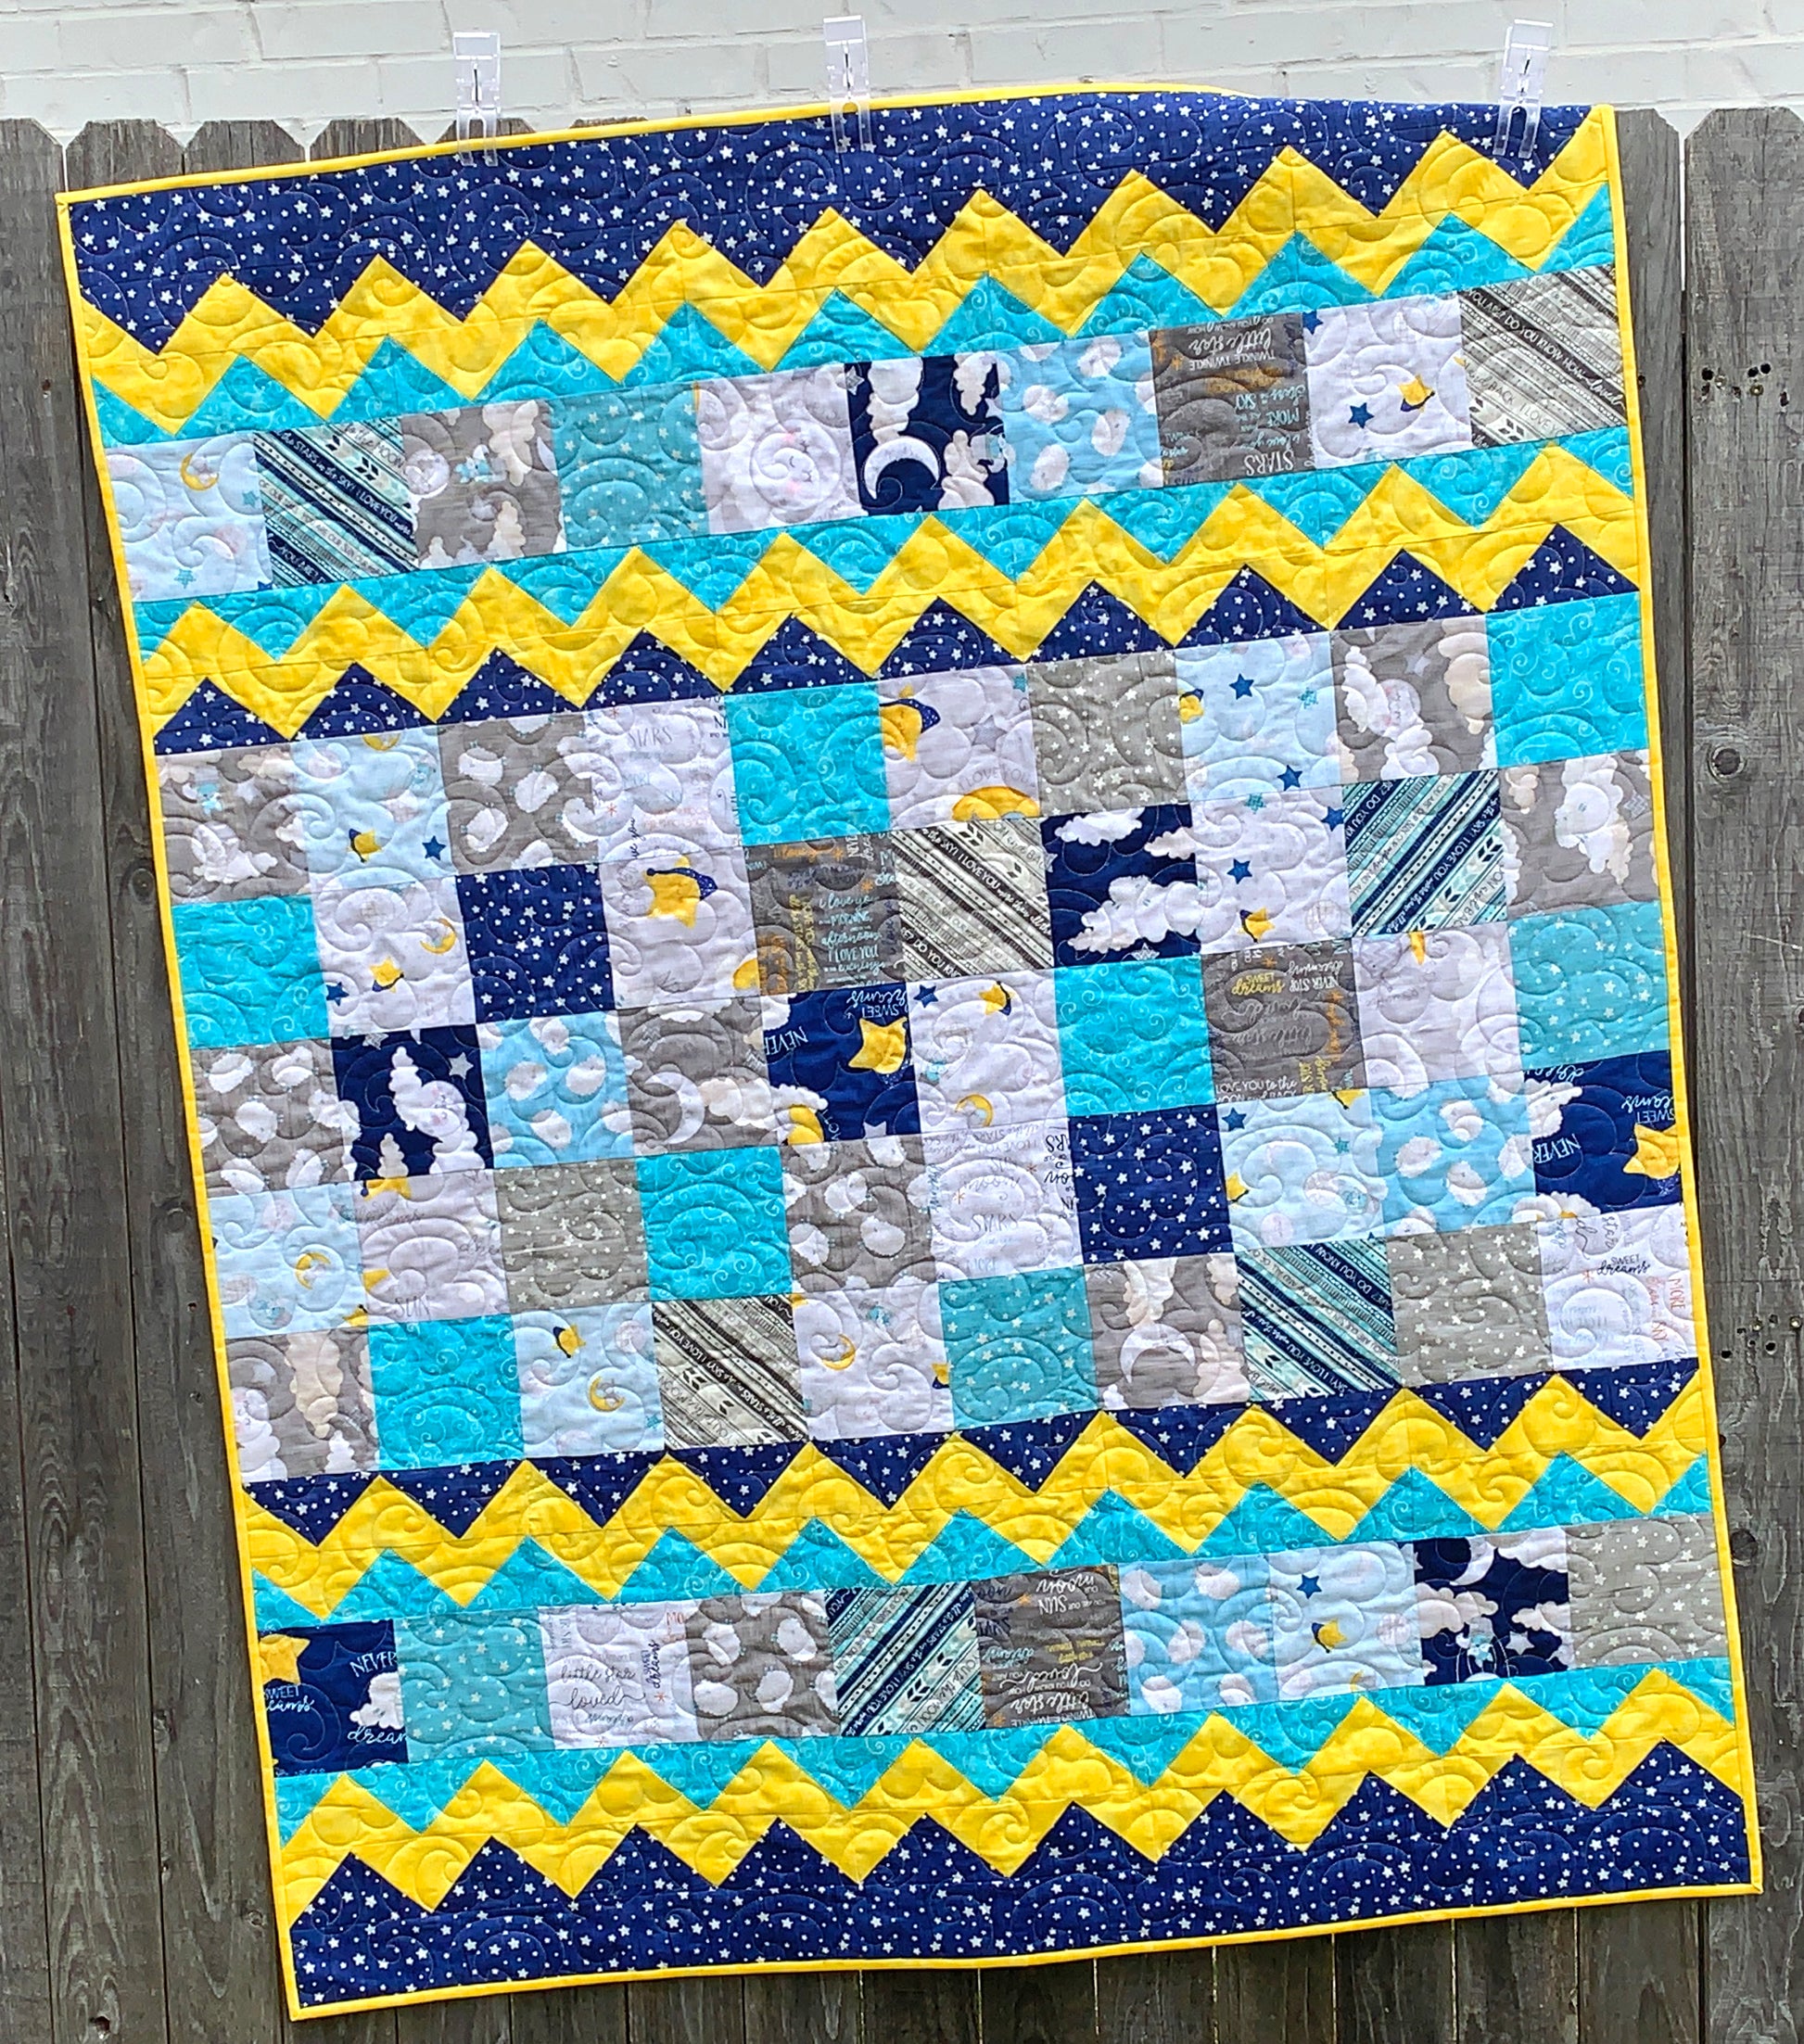 Blue, yellow, teal and gray patchwork baby or toddler quilt with four zig-zag rows accenting the patchwork blocks. Quilt is shown displayed on a fence.